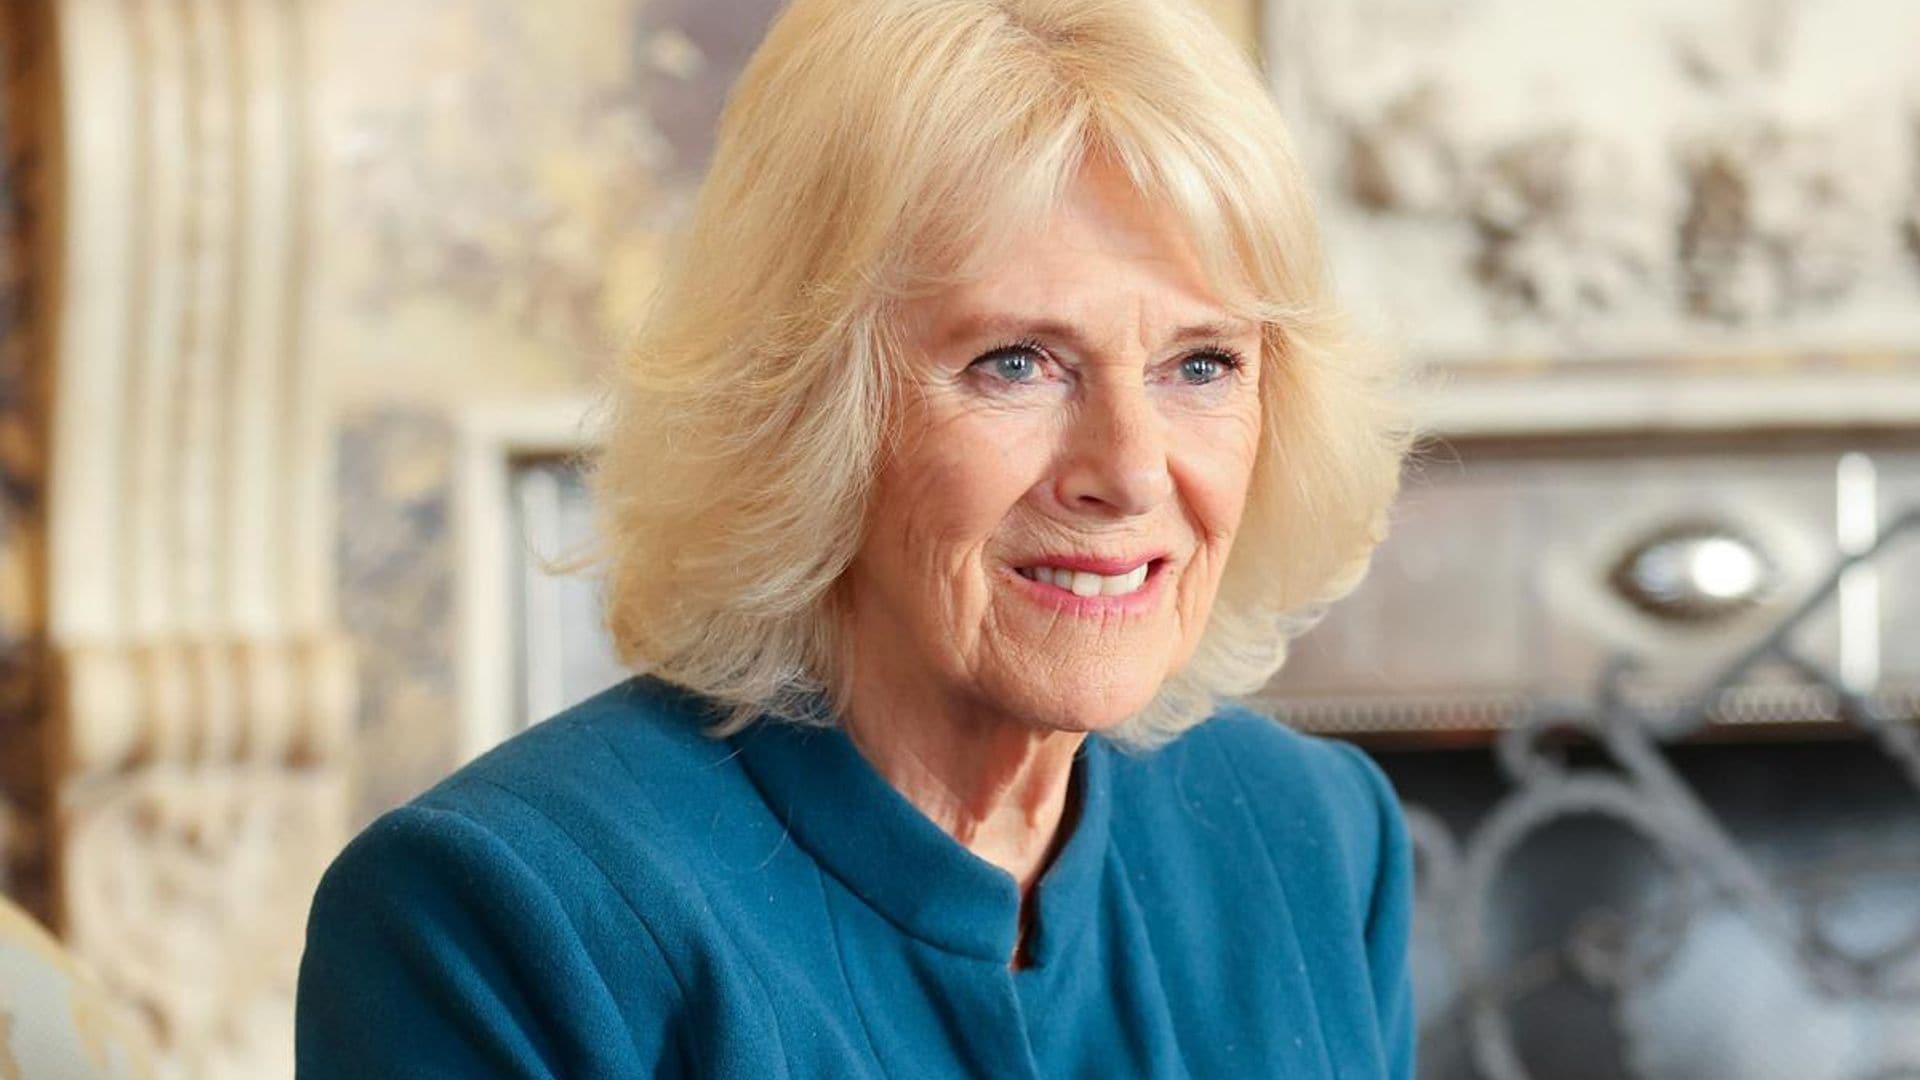 The Duchess of Cornwall meets her ‘fictional alter ego’ from ‘The Crown’